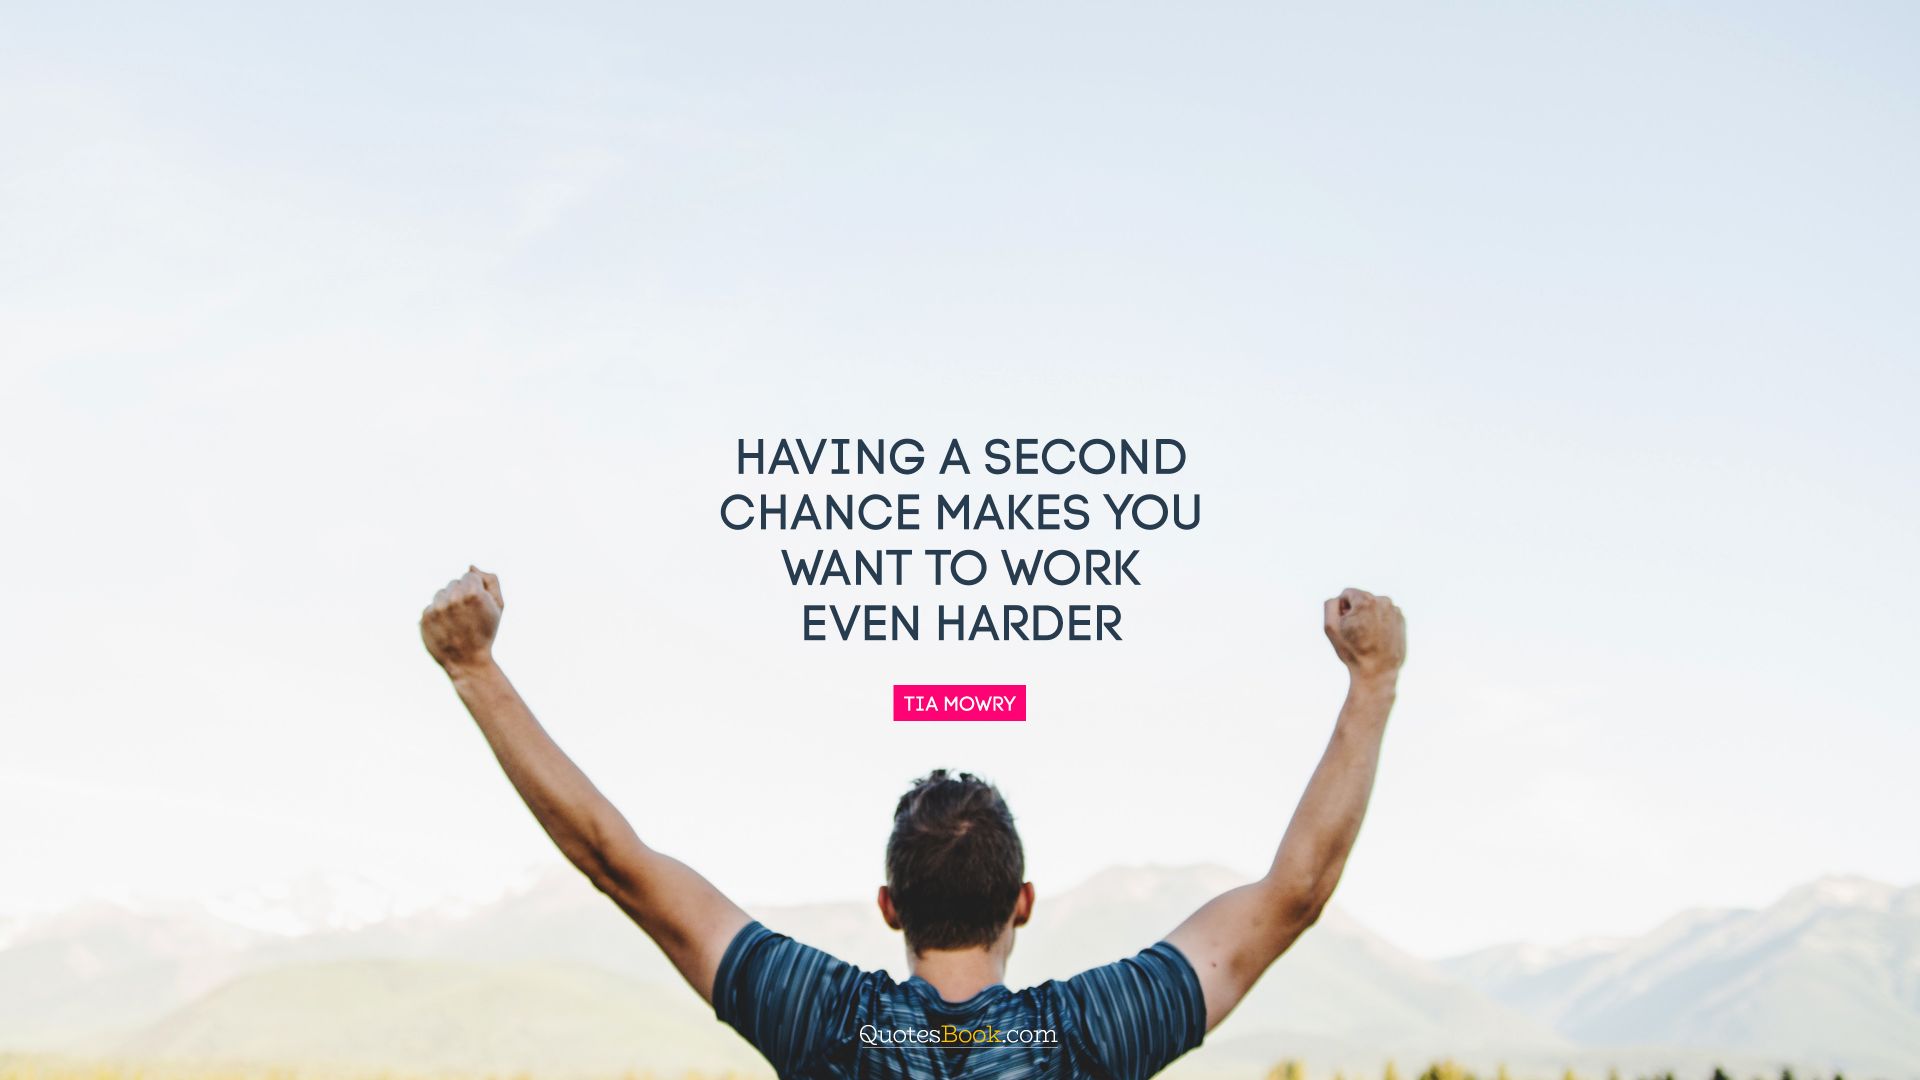 Having a second chance makes you want to work even harder. - Quote by Tia Mowry